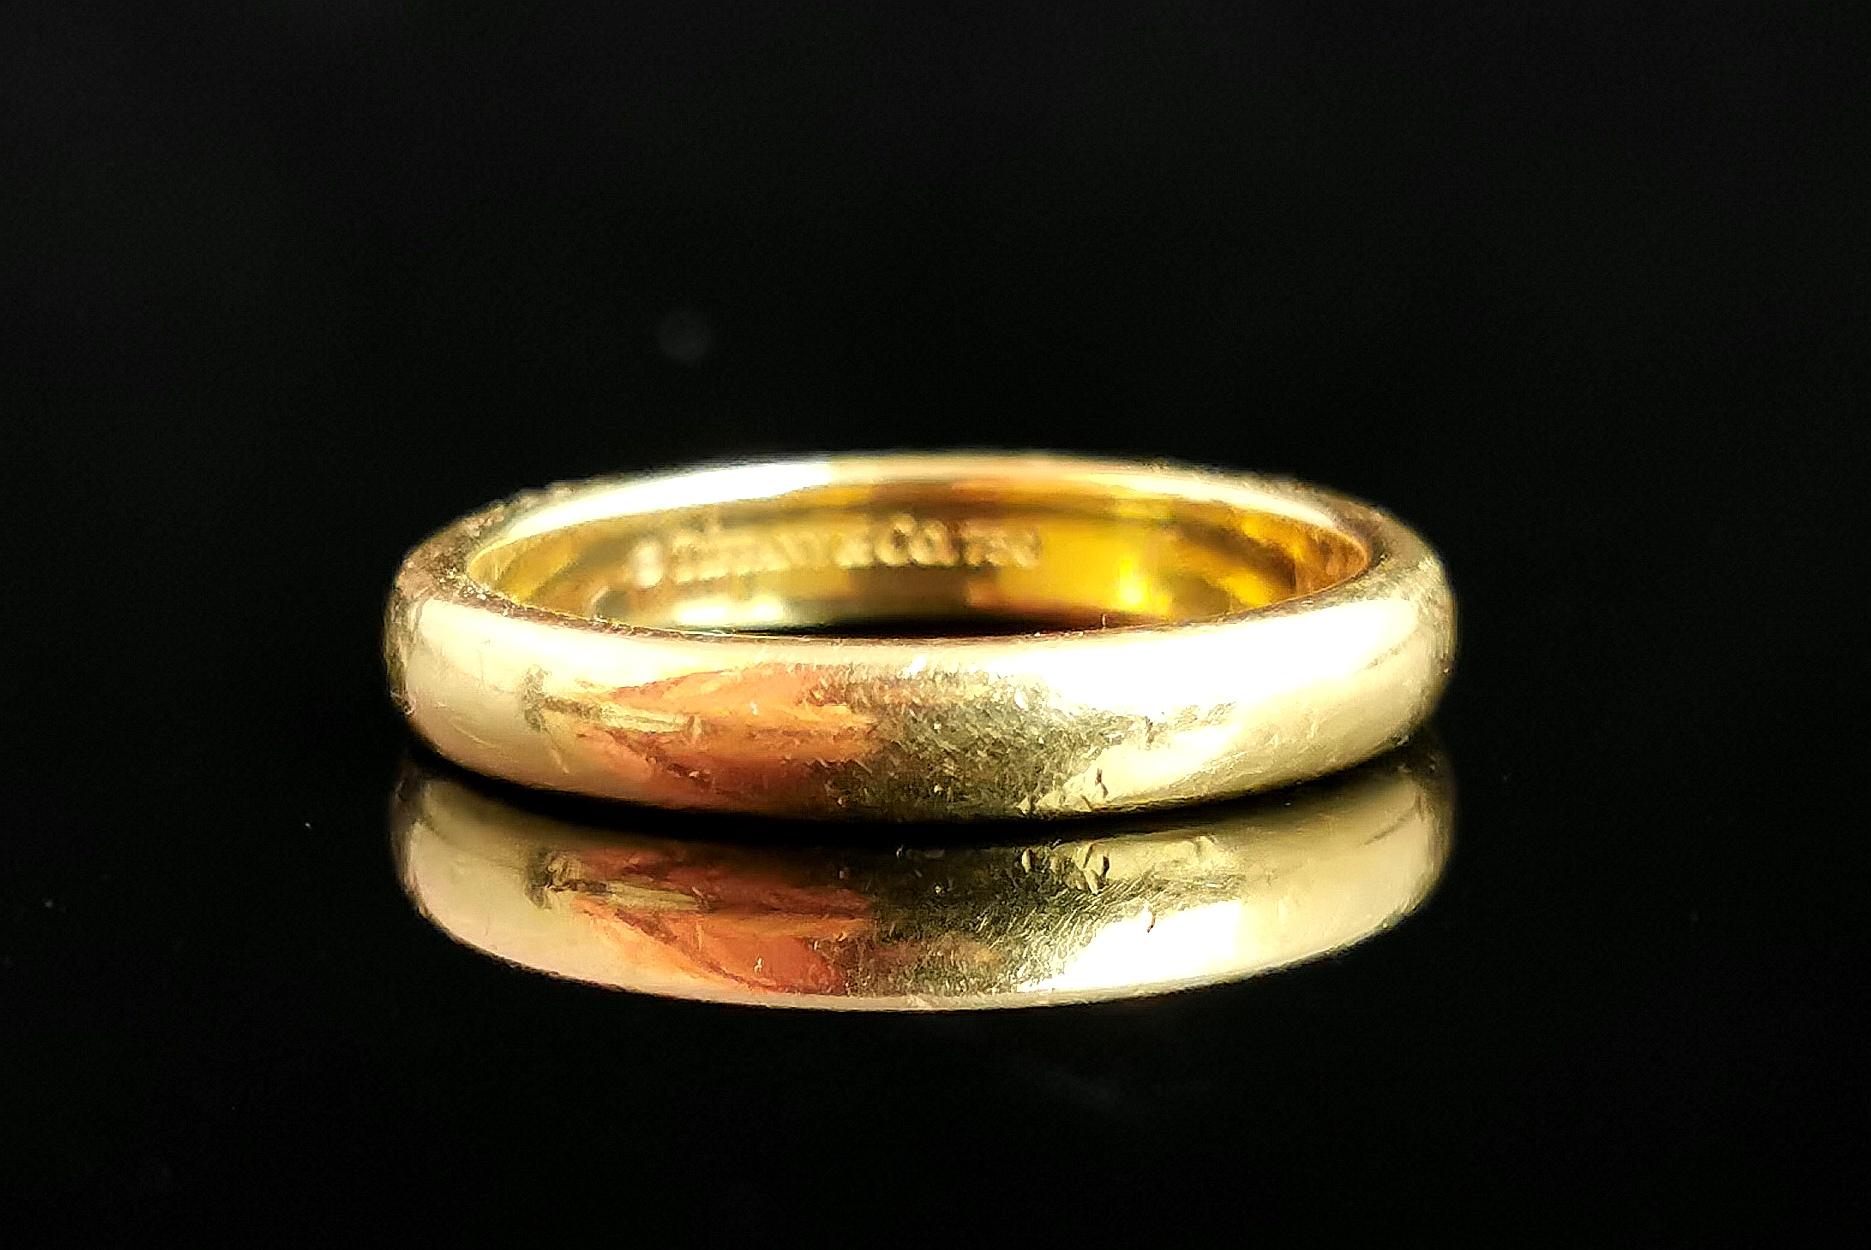 A beautiful vintage Tiffany Classic 18kt yellow gold band ring.

From the timeless Tiffany classic range, early 2000s, this beautifully crafted Lucida wedding band ring has a chunky D profile and smooth finish.

A perfect choice as a gift or wedding